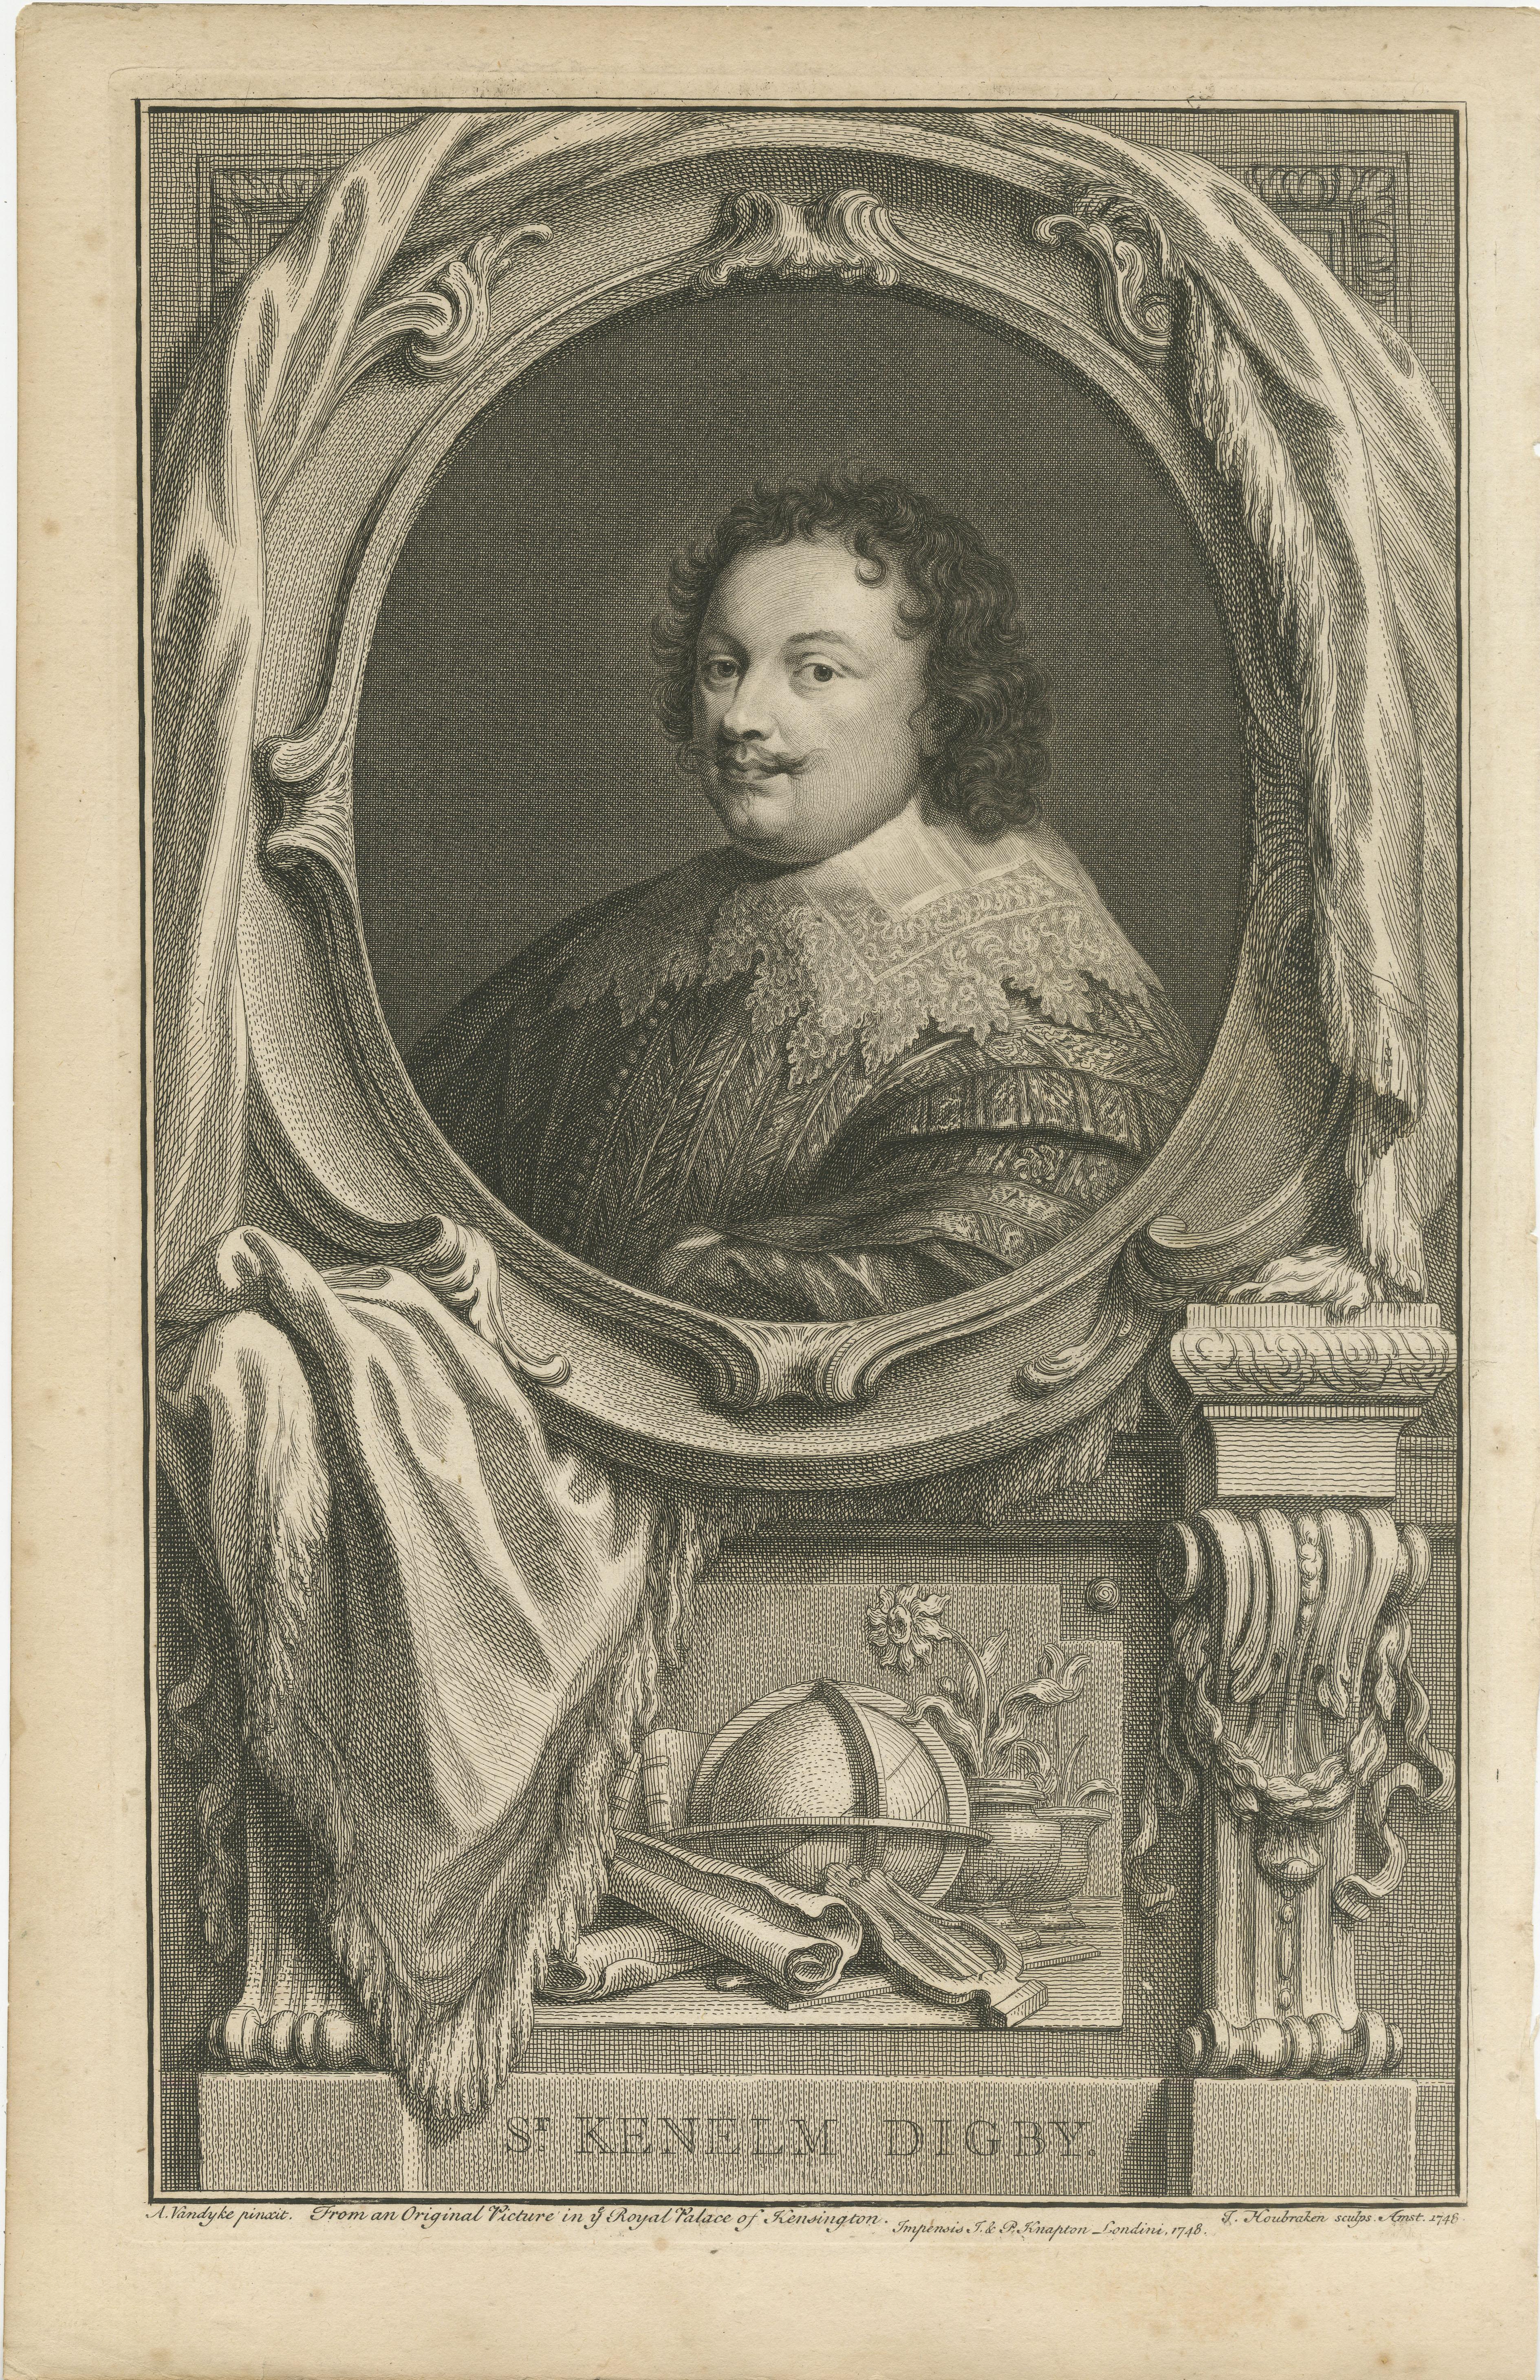 Antique portrait titled 'Sr. Kenelm Digby'. Sir Kenelm Digby (11 July 1603 – 11 June 1665) was an English courtier and diplomat. He was also a highly reputed natural philosopher, astrologer and known as a leading Roman Catholic intellectual and